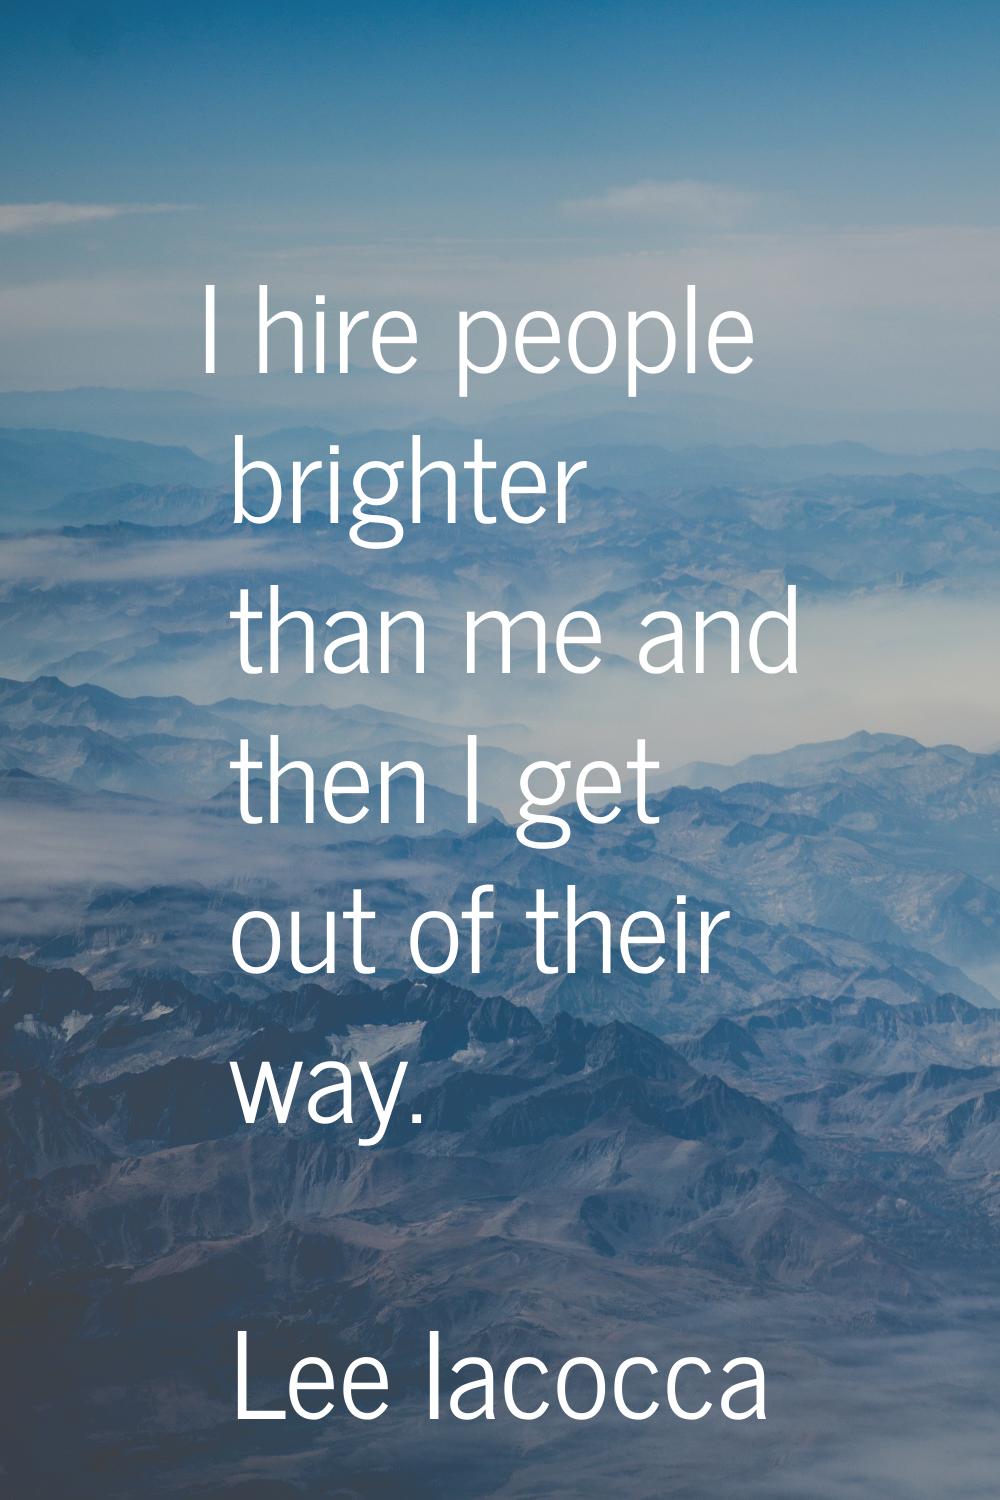 I hire people brighter than me and then I get out of their way.